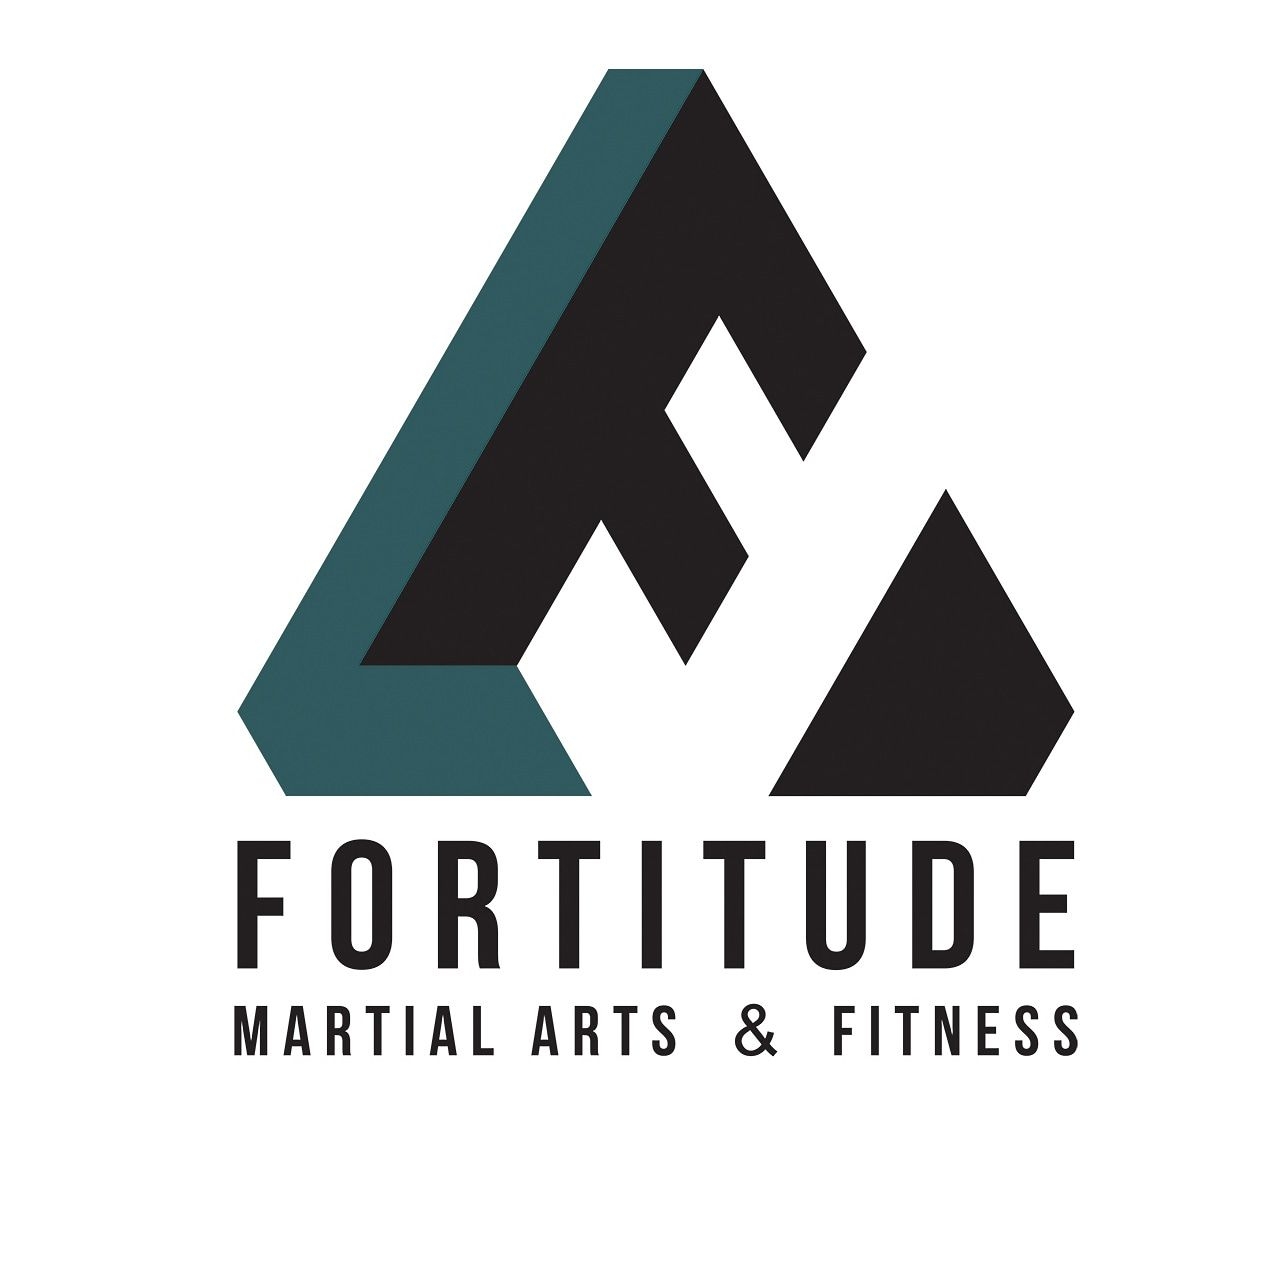 Fortitude Martial Arts & Fitness